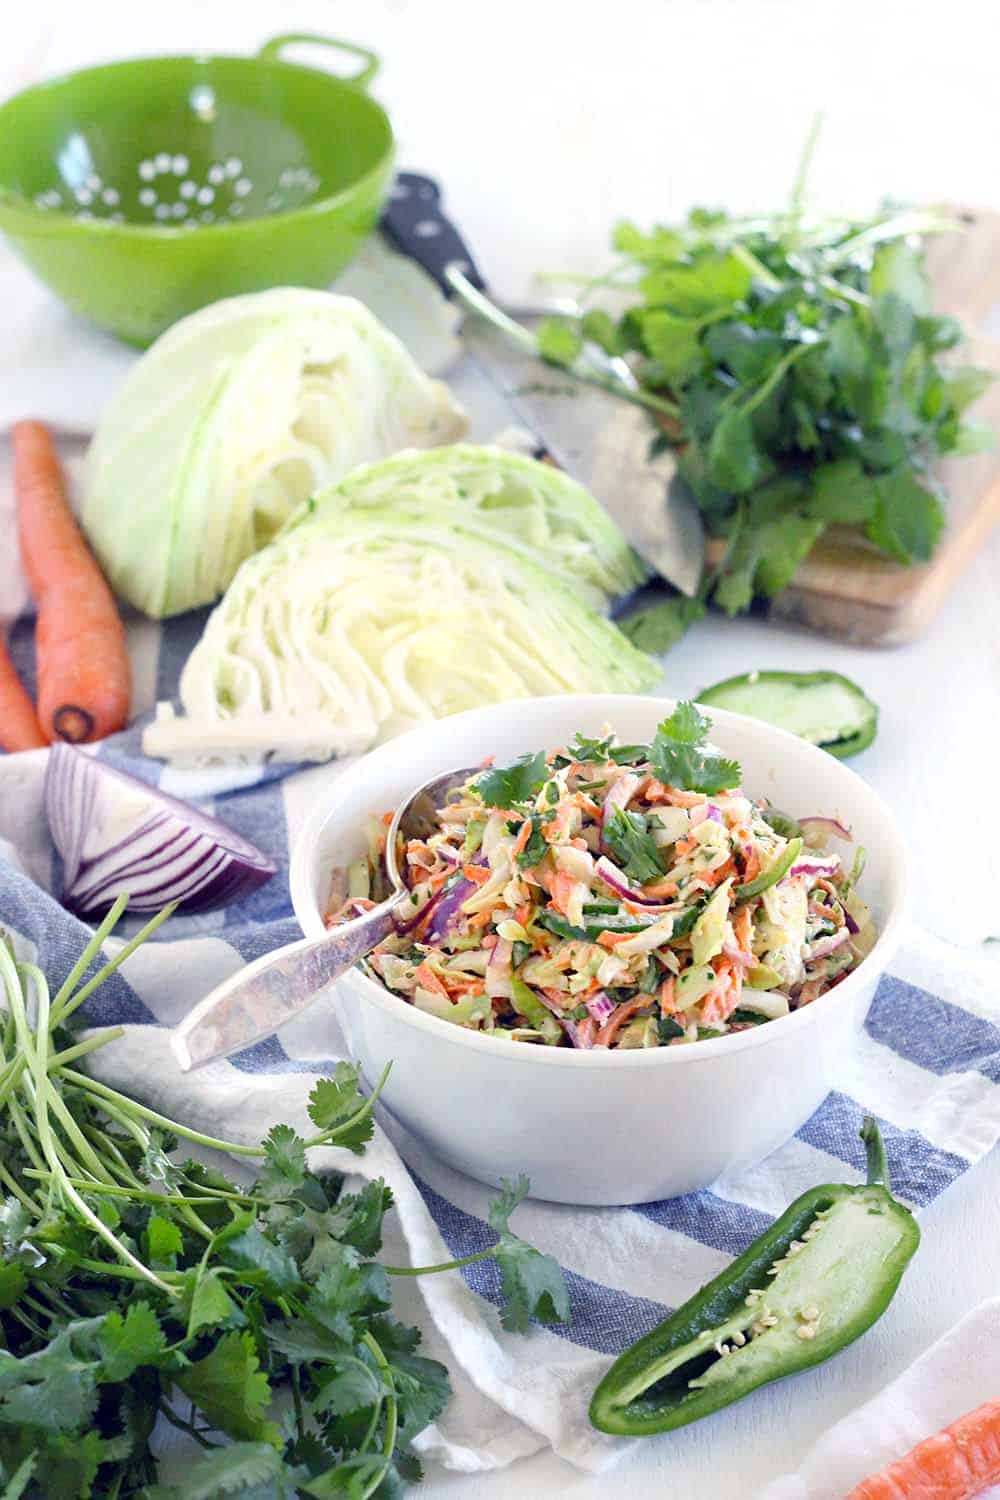 This easy, delicious recipe for Spicy Jalapeno Cilantro Slaw is great as a side, or on top of your favorite pulled pork sandwiches or fish tacos! Vegetarian, vegan optional, low carb, and paleo compliant.